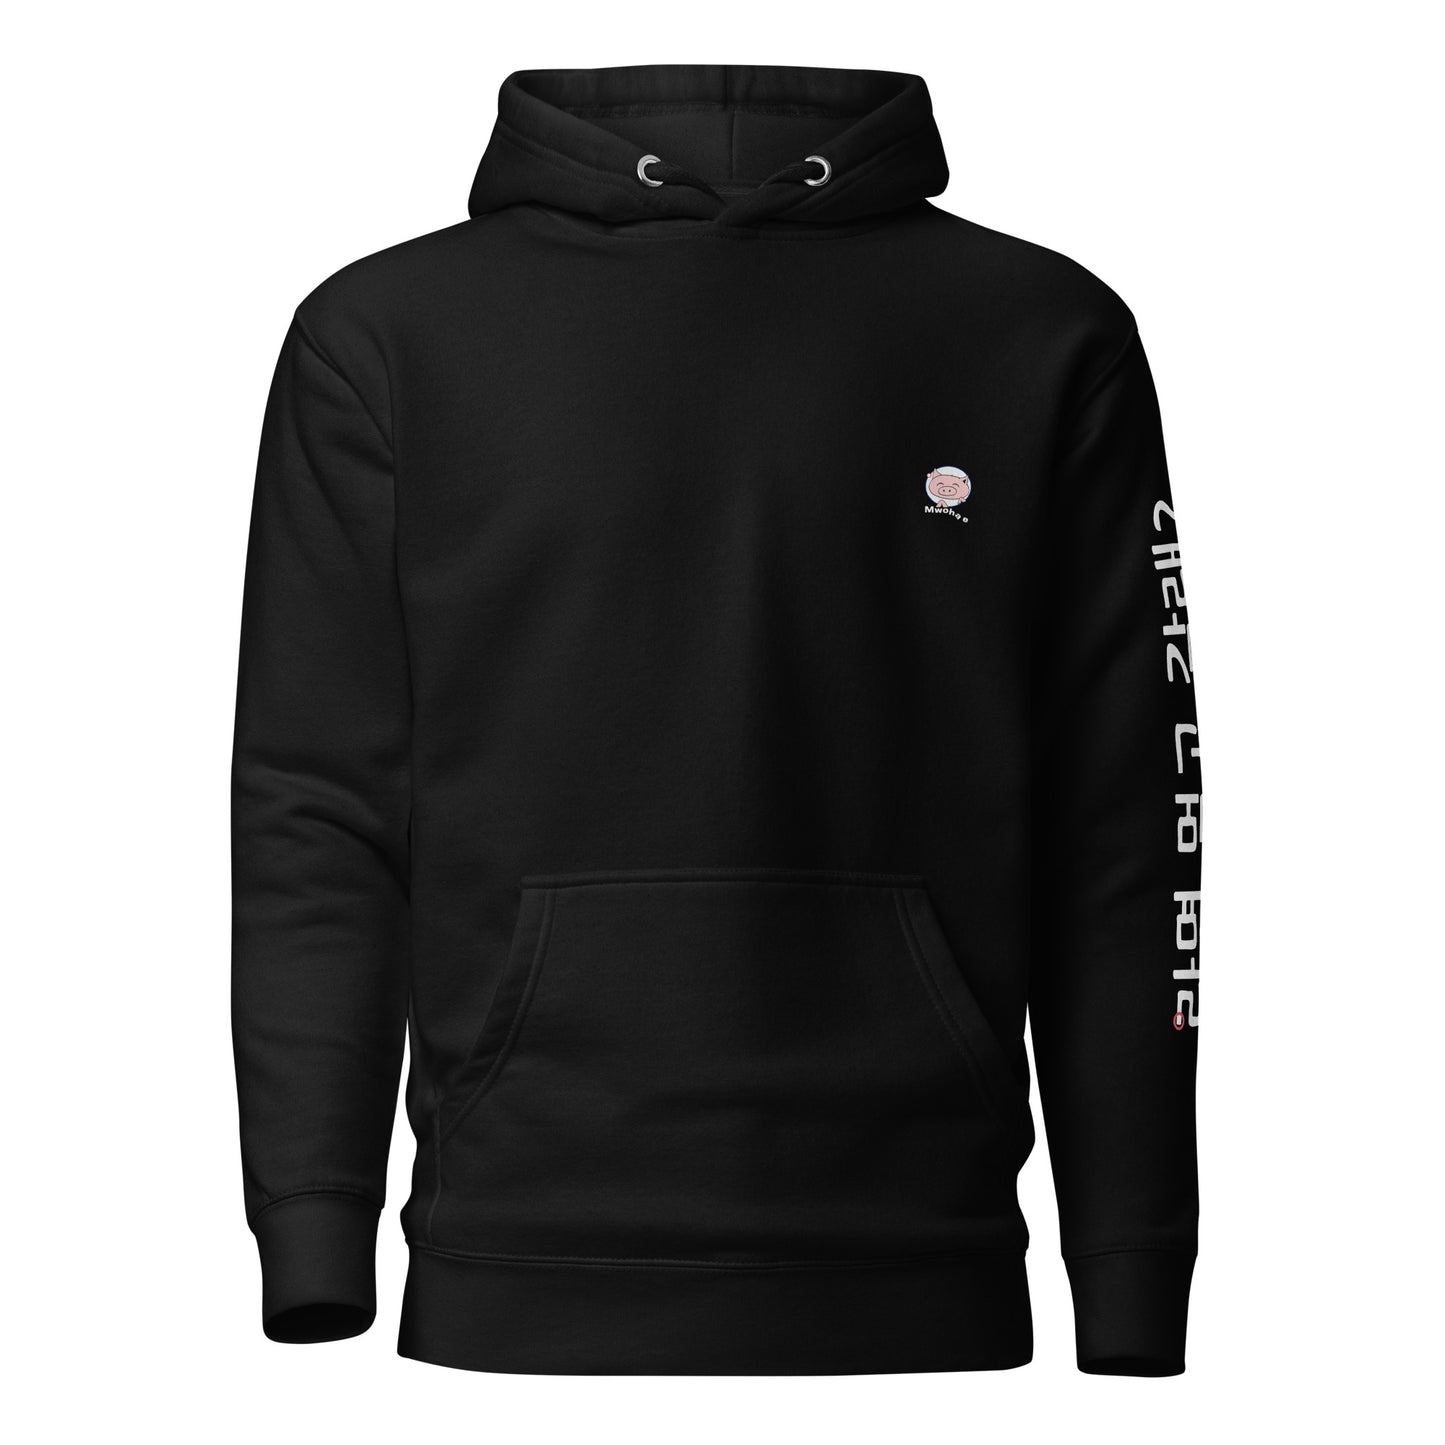 Black hoodie with small Mwohae logo on left chest